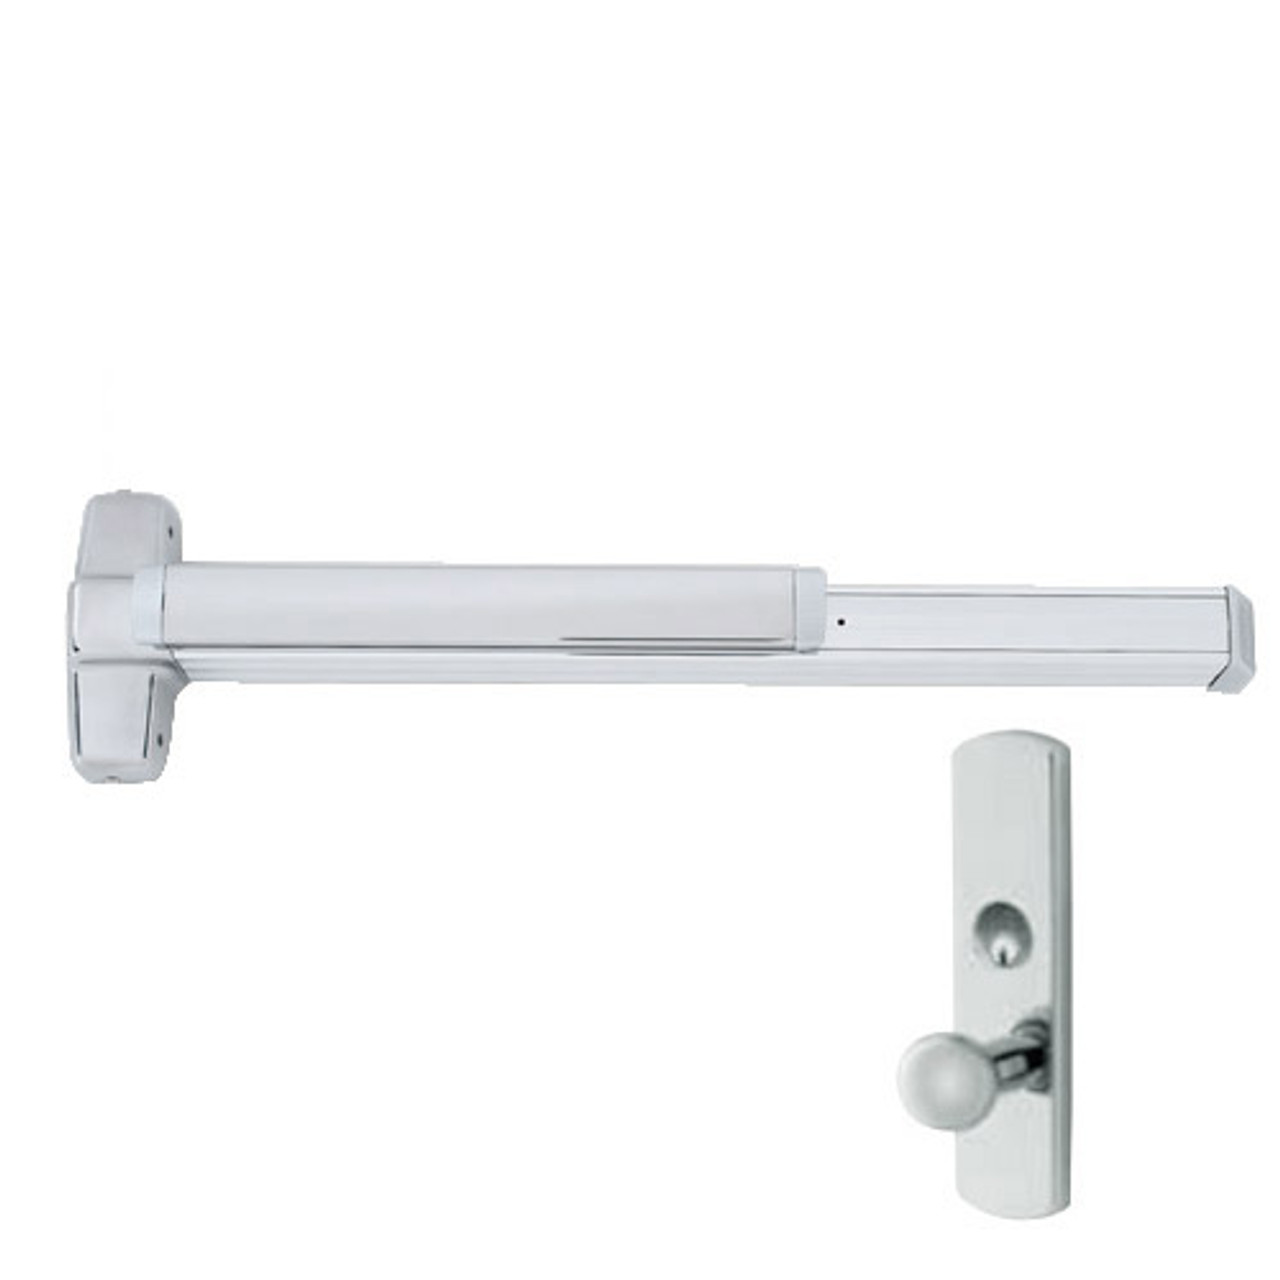 QEL9847WDC-K-US28-3 Von Duprin Exit Device with Quiet Electric Latch in Anodized Aluminum